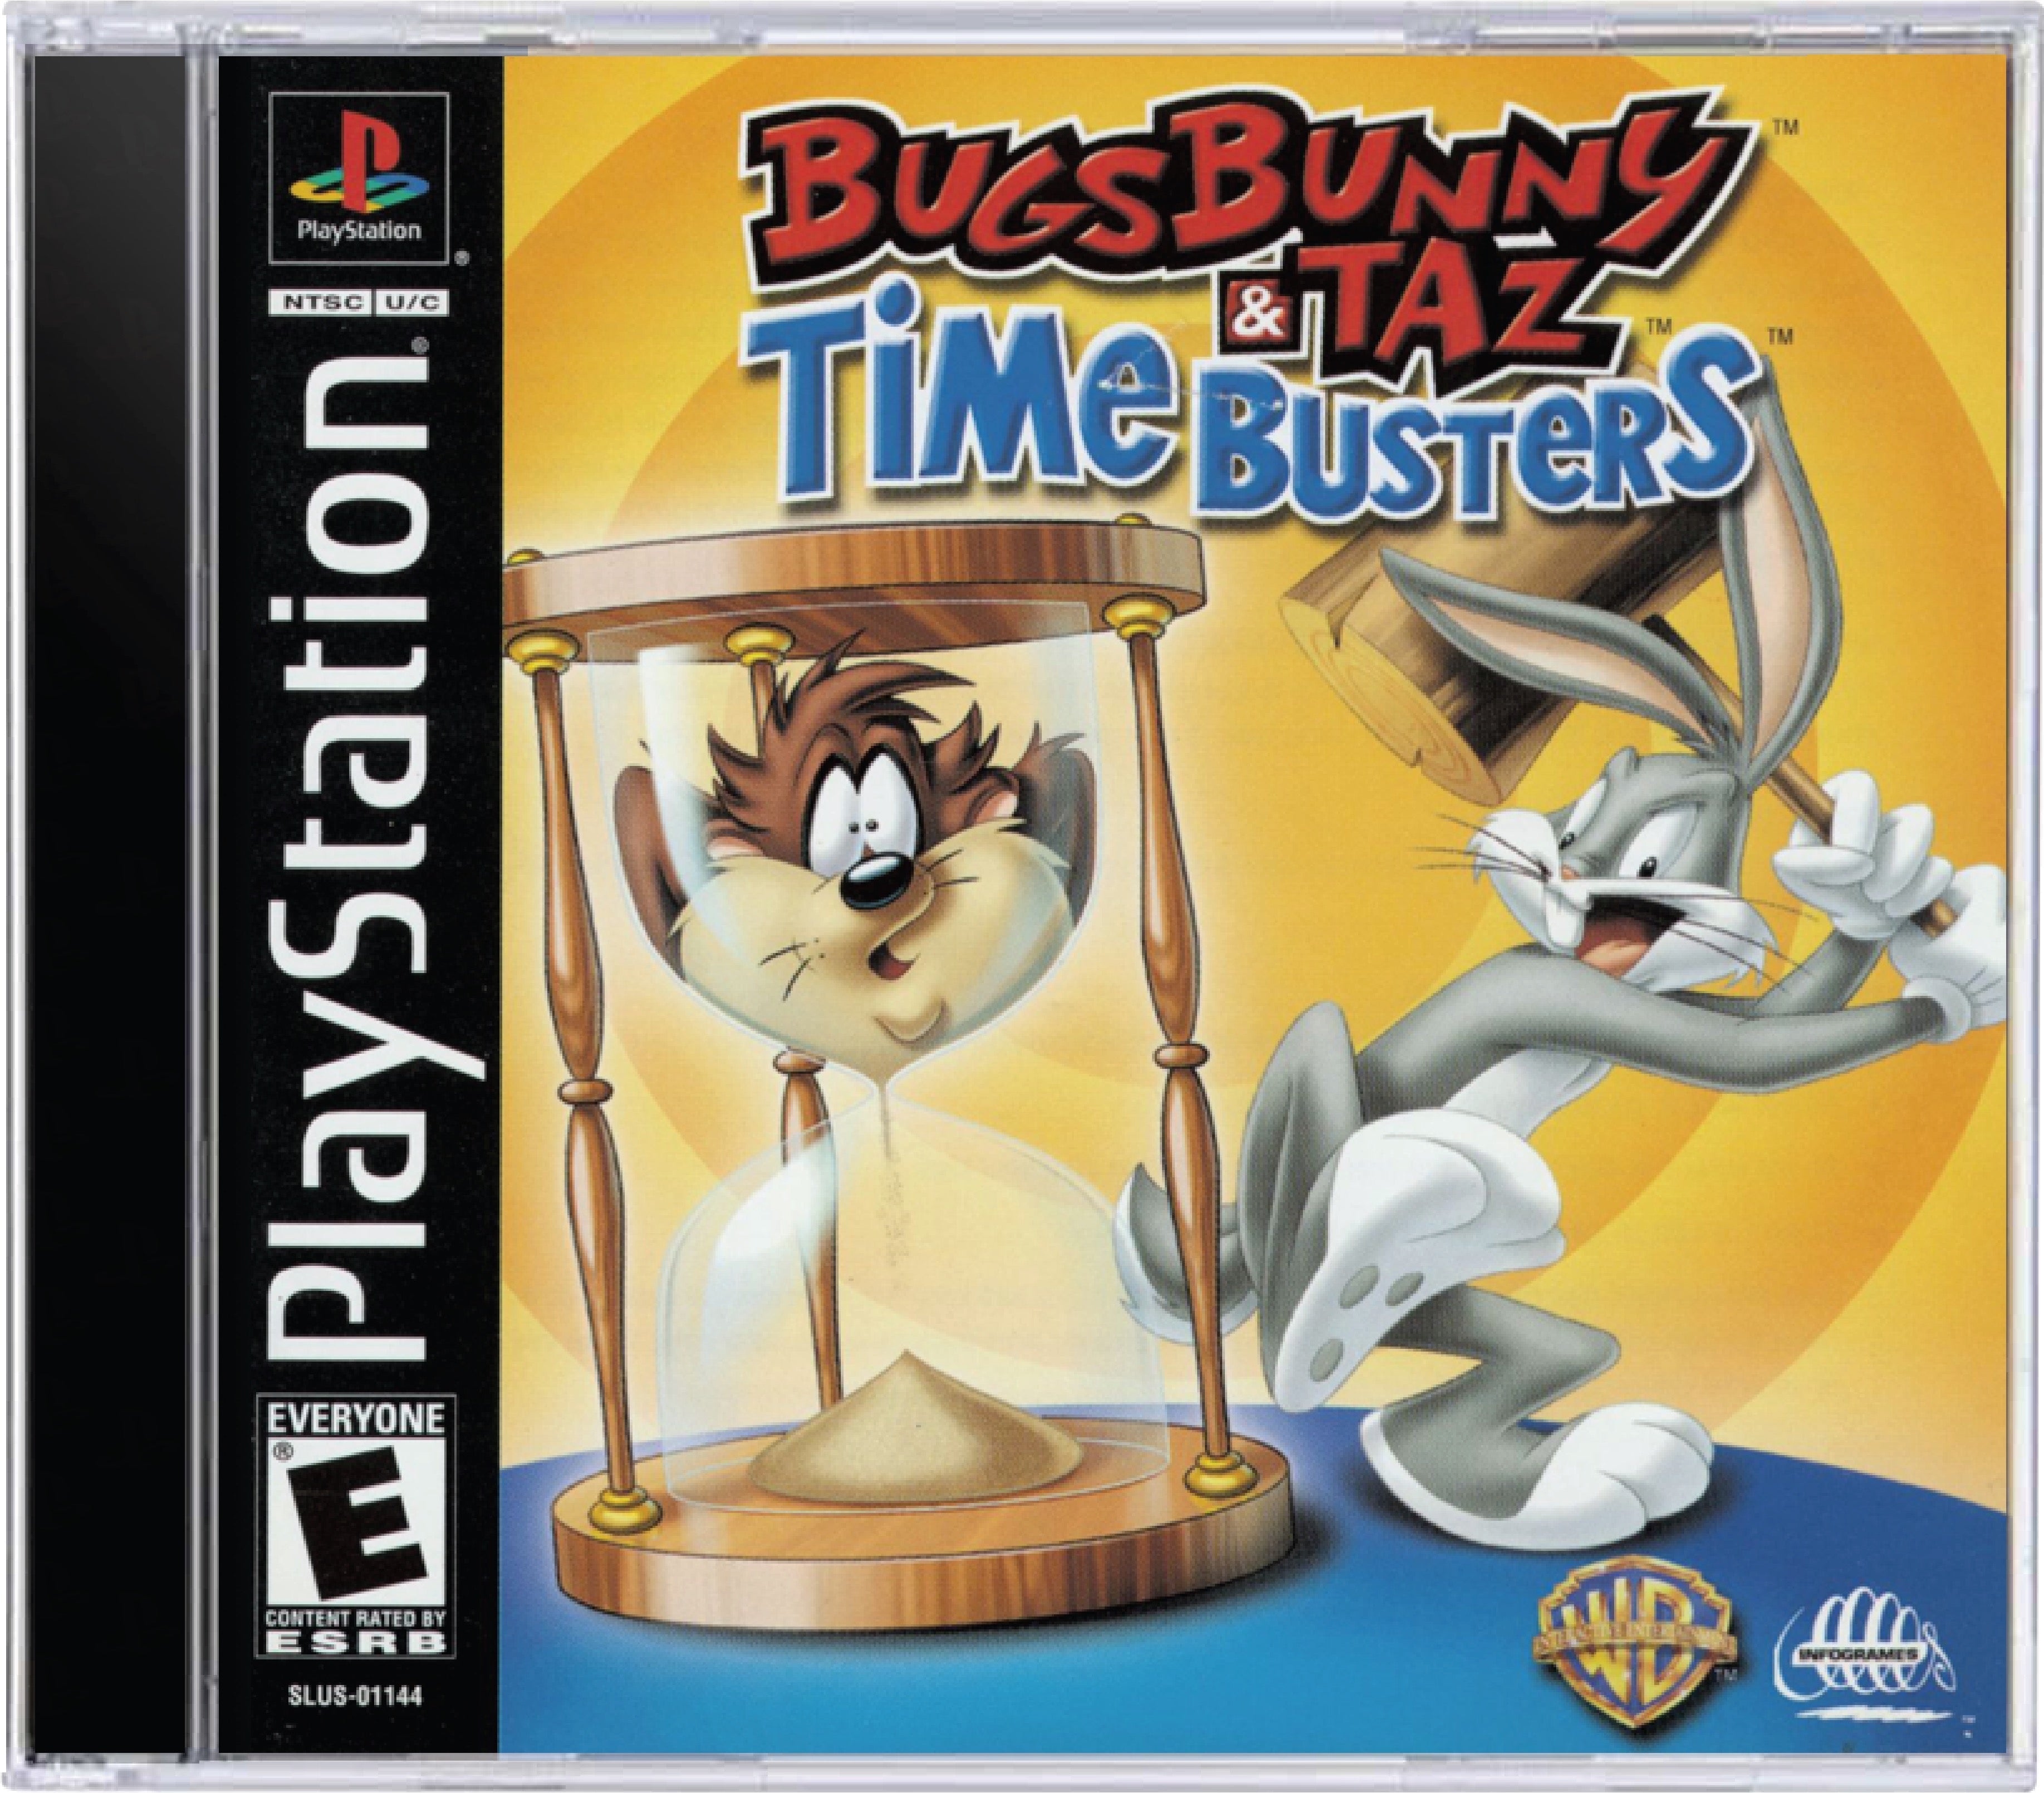 Bugs Bunny and Taz Time Busters Cover Art and Product Photo